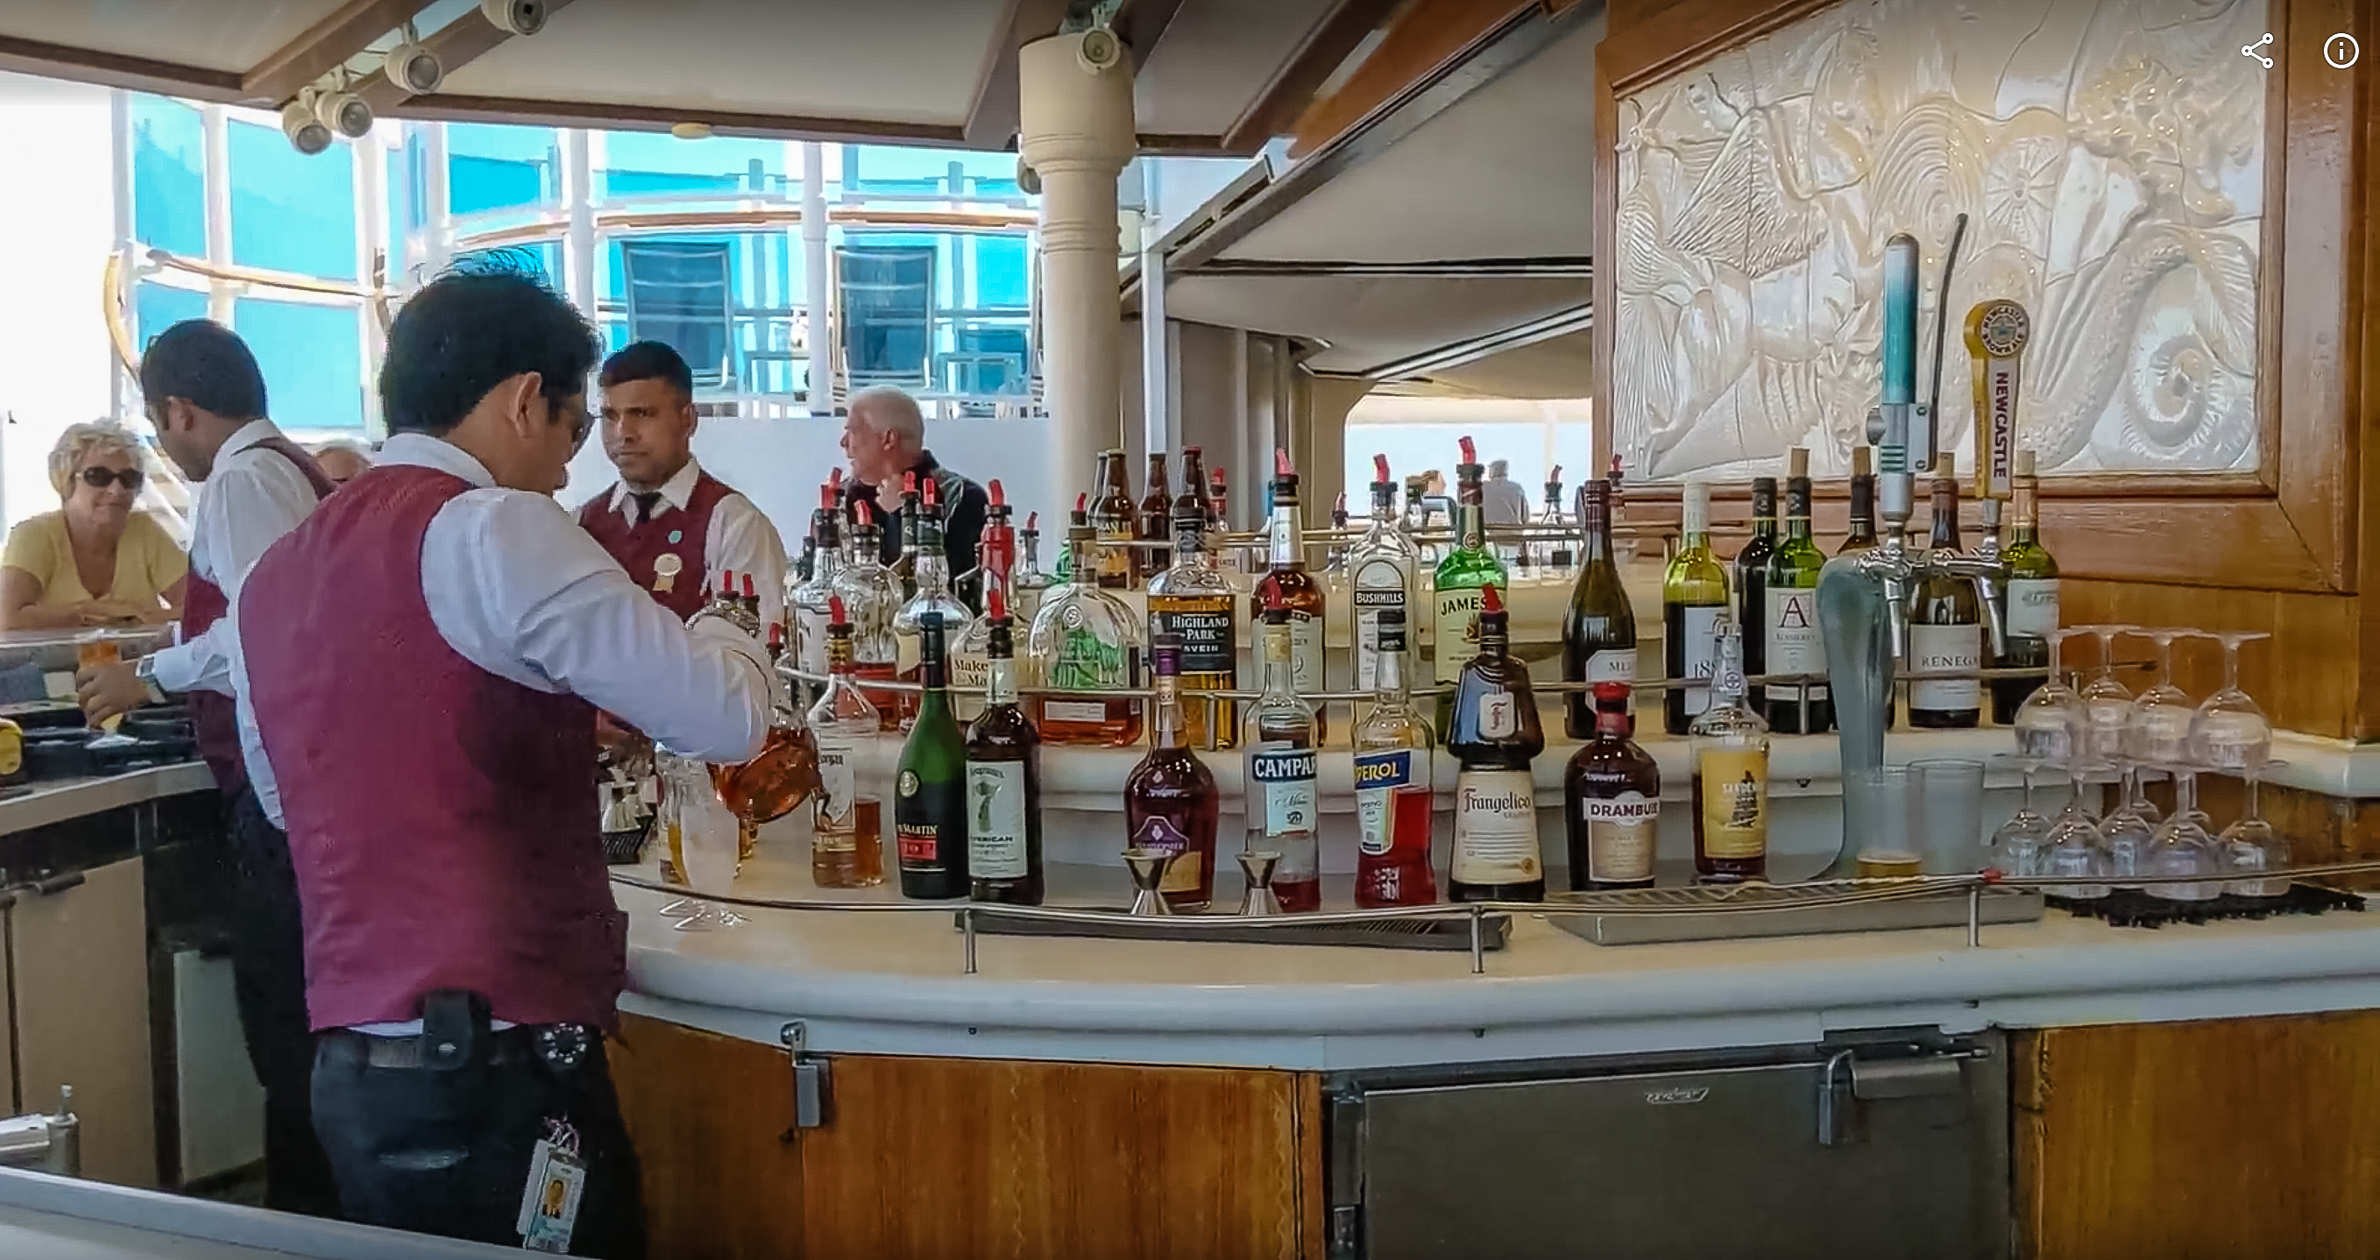 Whether you prefer a beer at the bar or a drink by the pool, cruise drinks packages can be a big question mark. But should you spring for one? This post will help you decide - and even includes a table with numbers and pricing!  #cruise #cruisetips #cruisevacation #drinks #drinkspackage